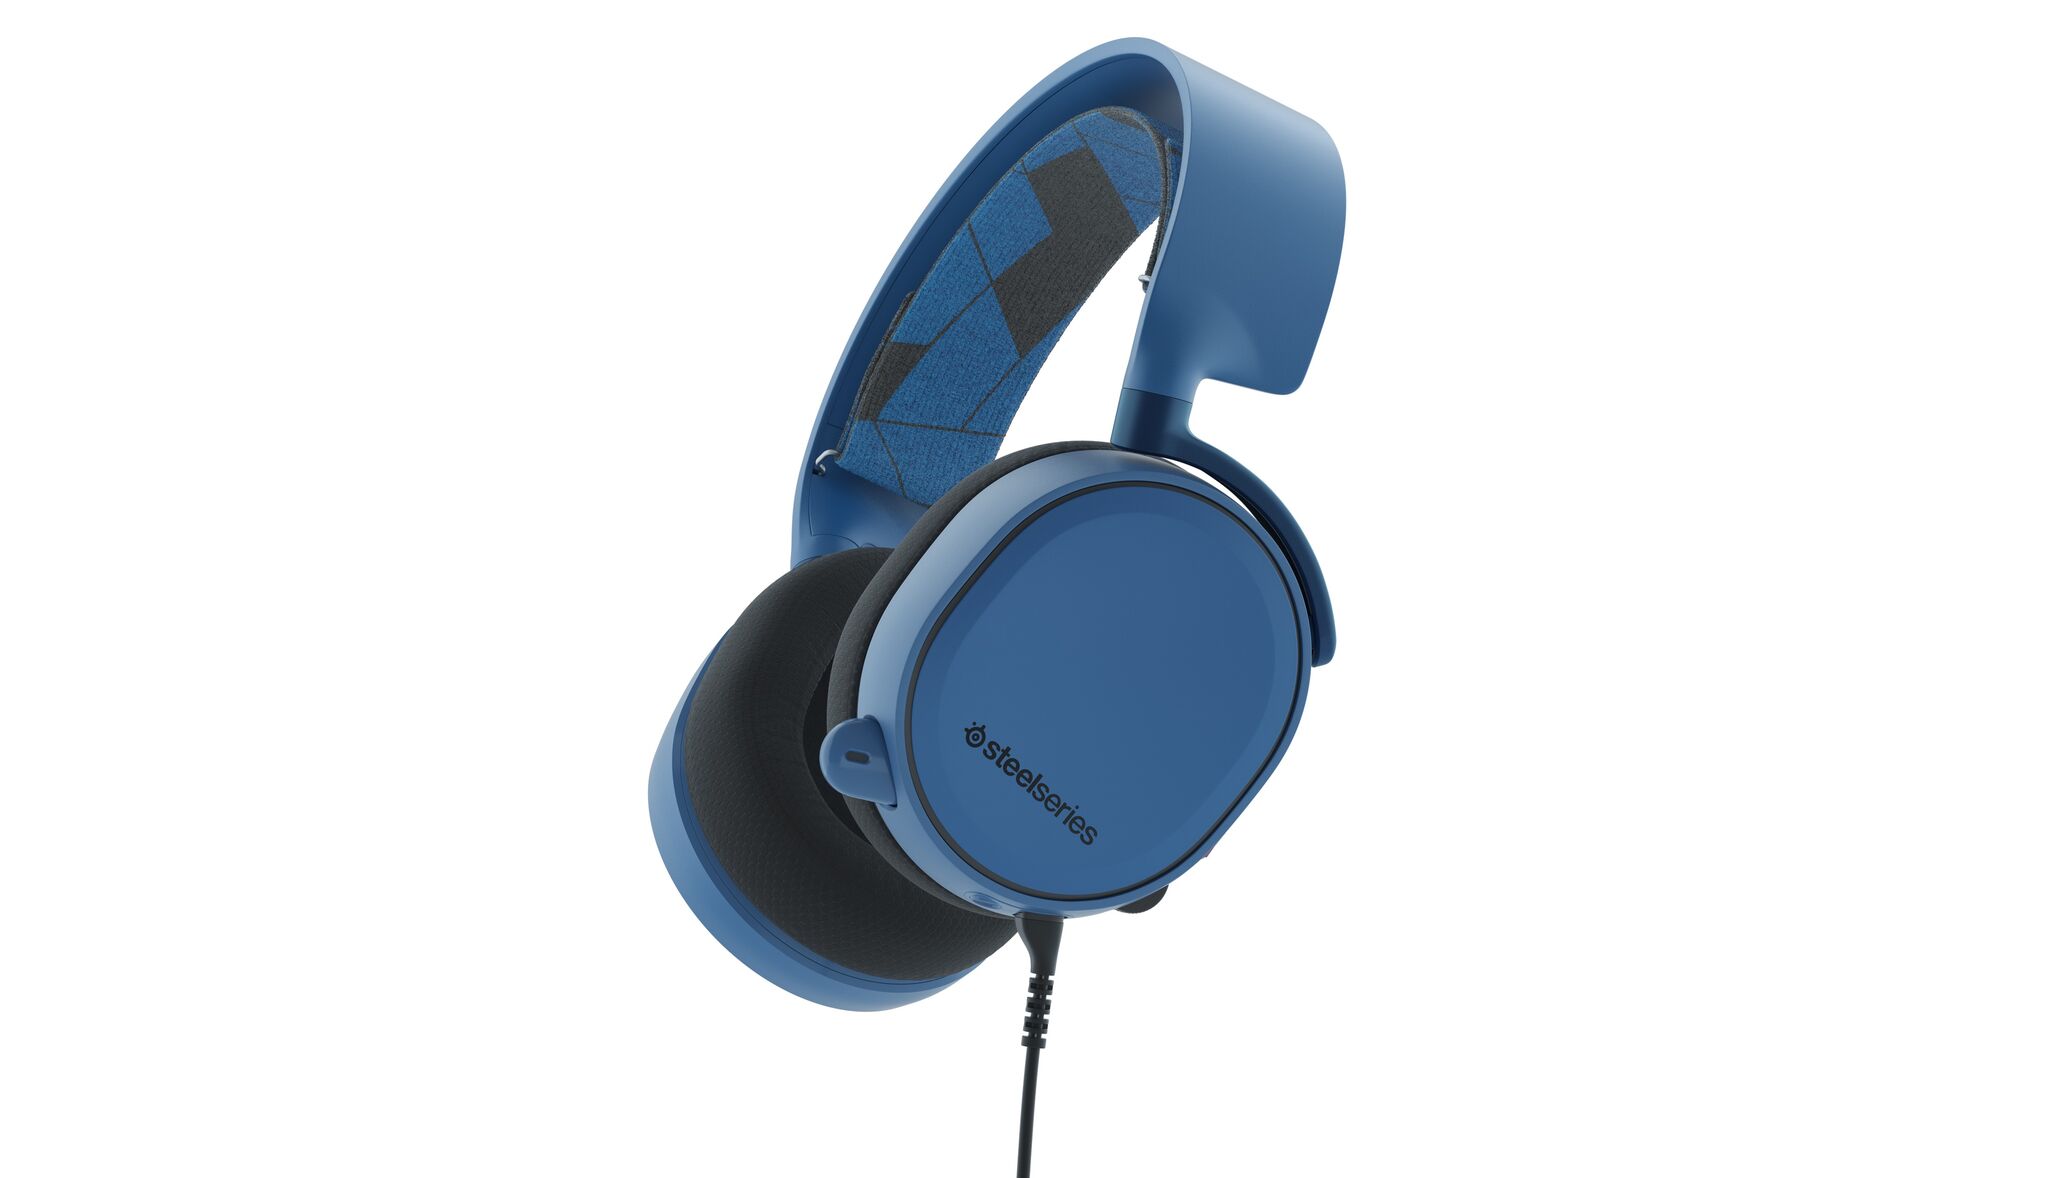 SteelSeries Makes a Splash with New Arctis Colors – Percentage of Sales to Be Donated to Charity